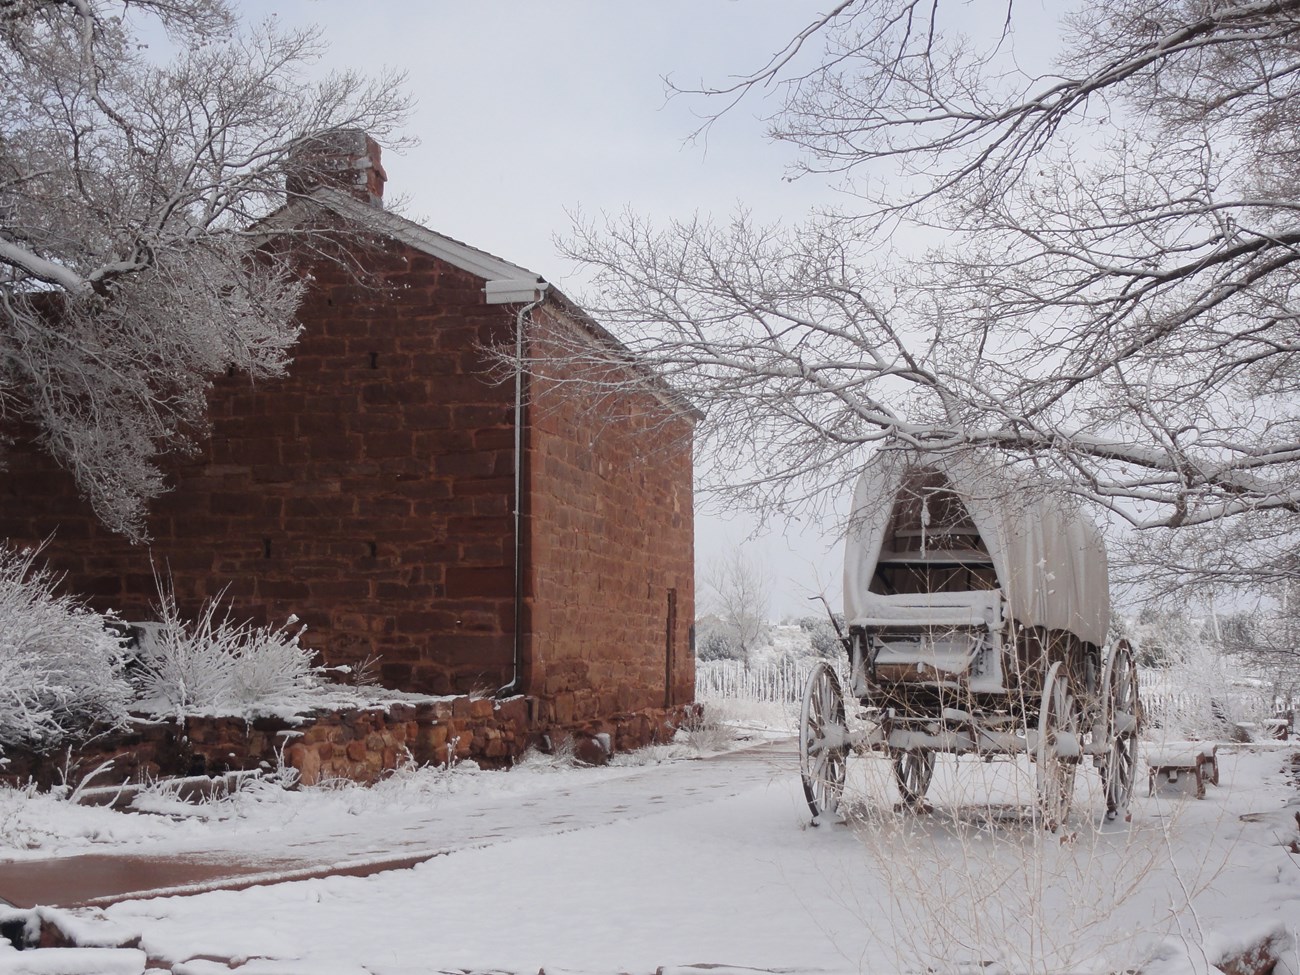 Snow has fallen on a two story red stone building next to a covered wagon.